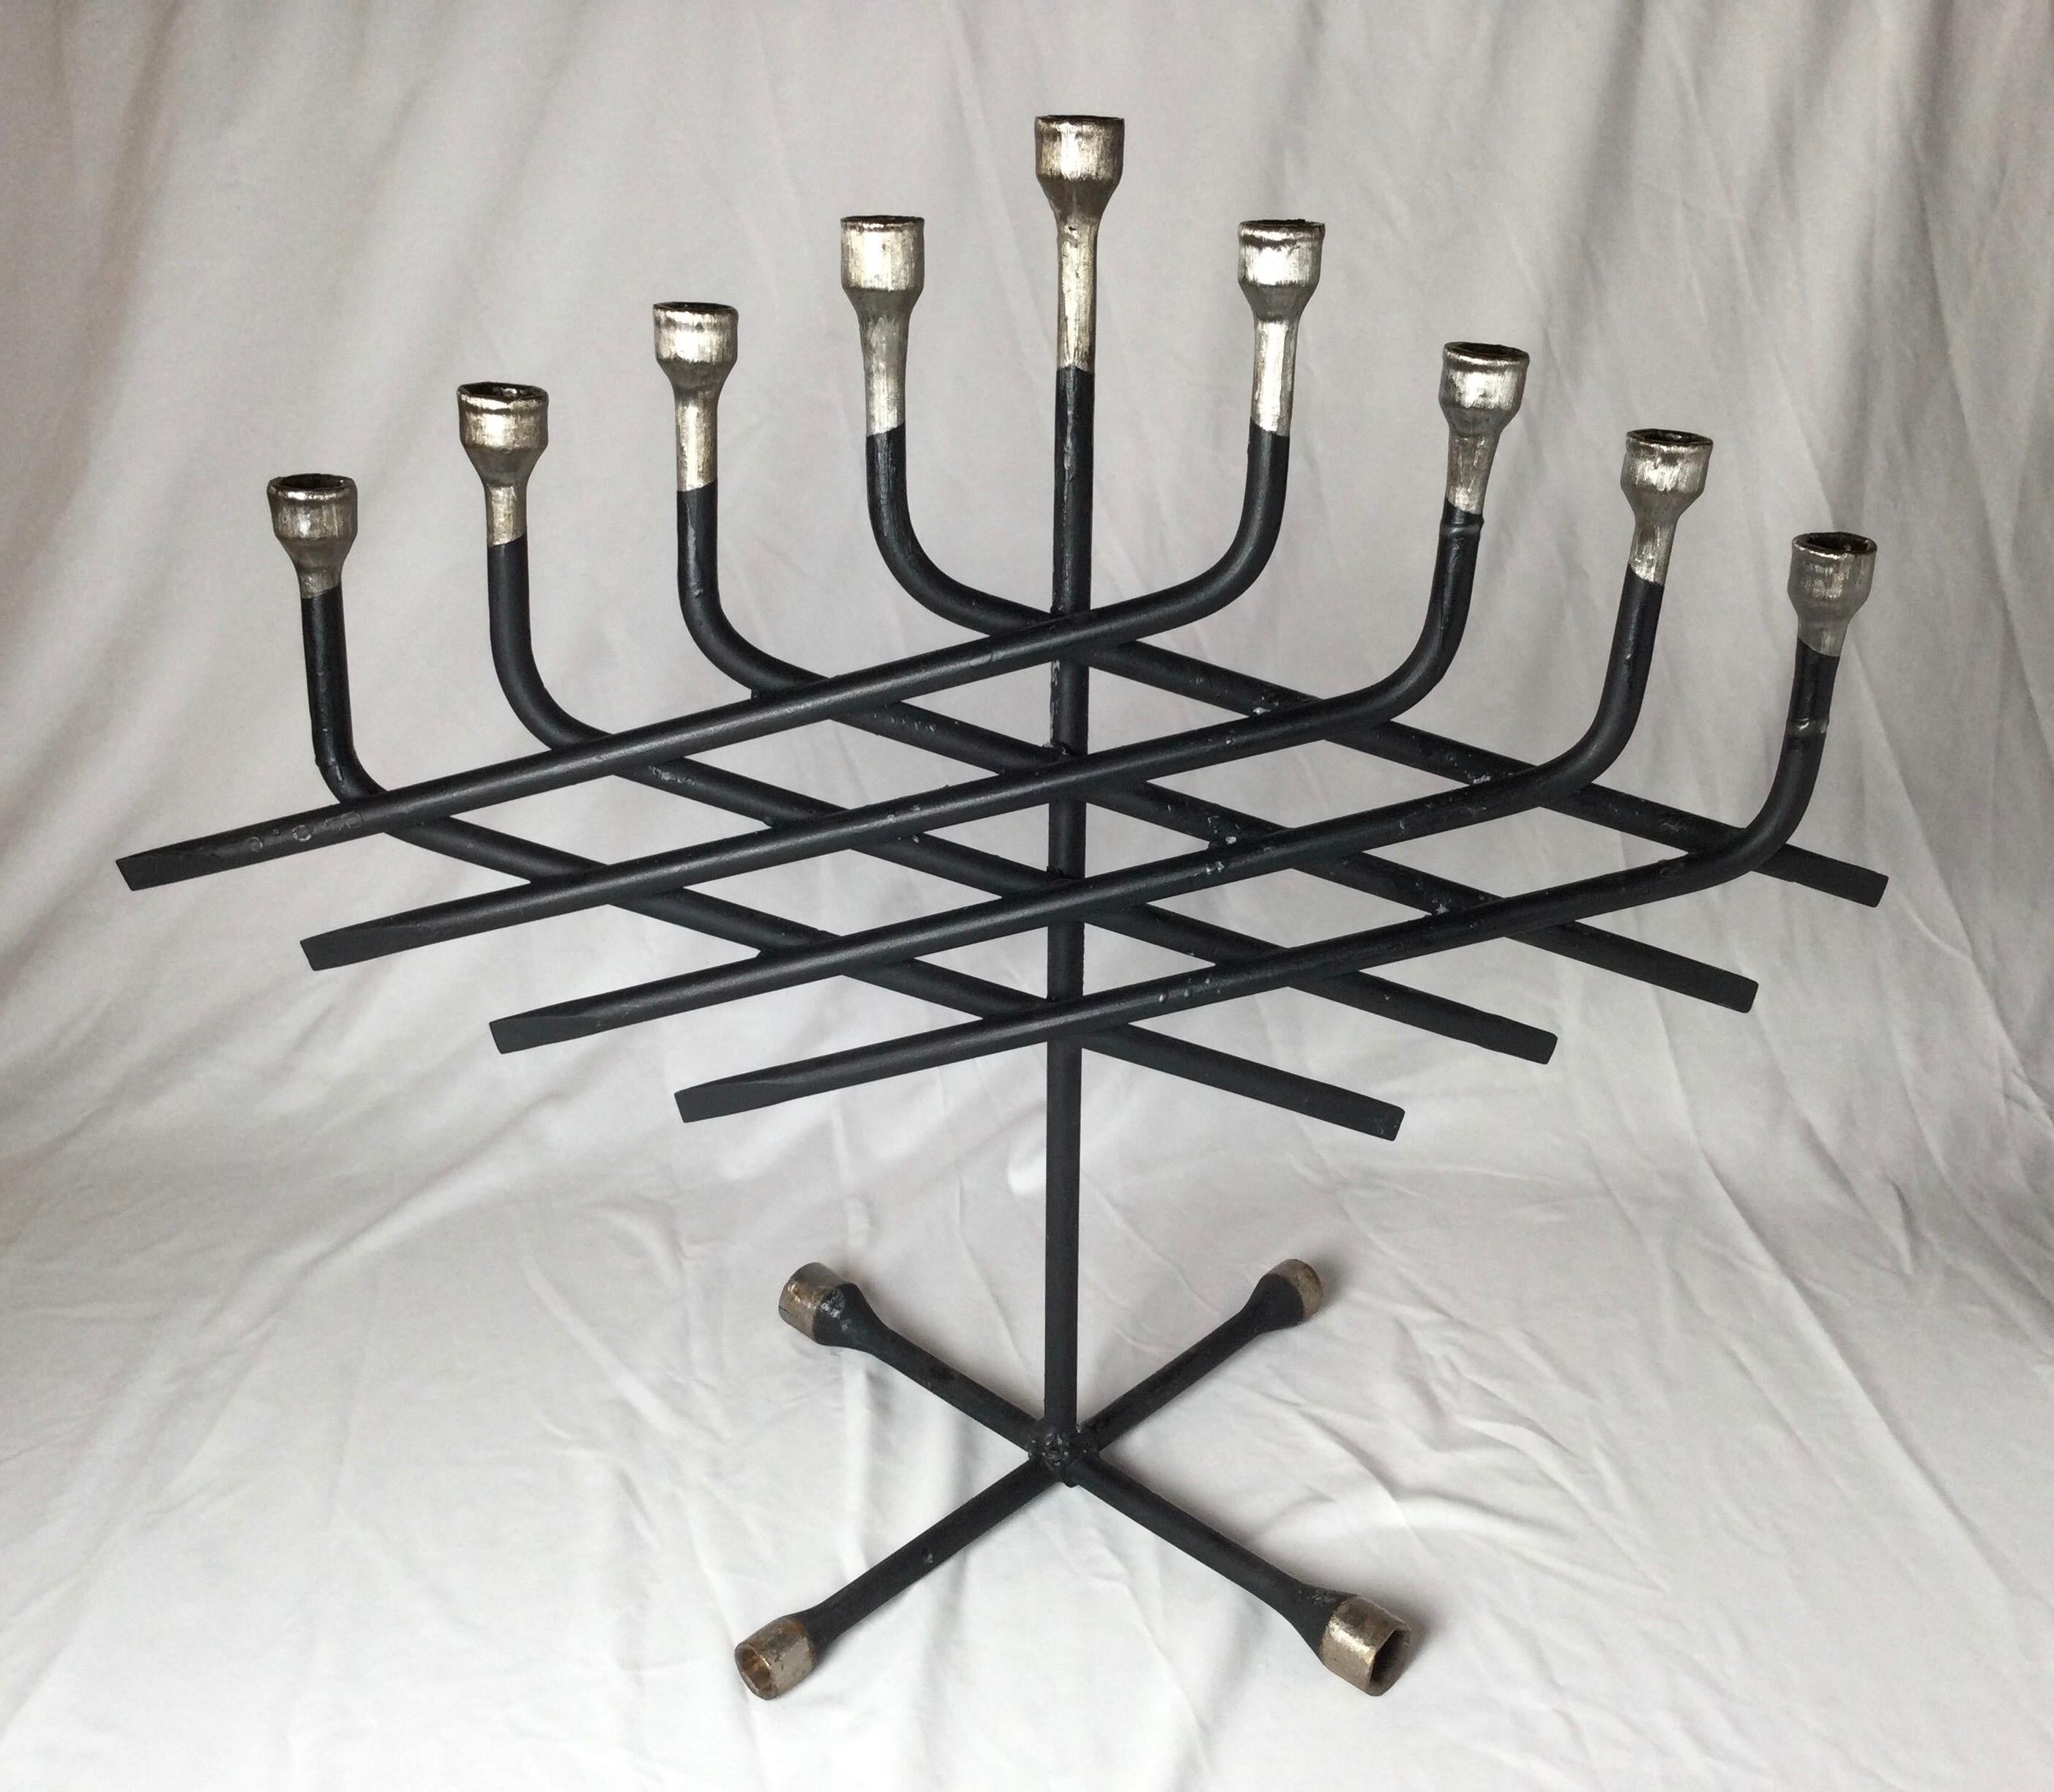 Hand made re-purposed Folk Art Judaica Menorah. Artist initialed. Hand crafted precision made using iron tire lug-wrenches.